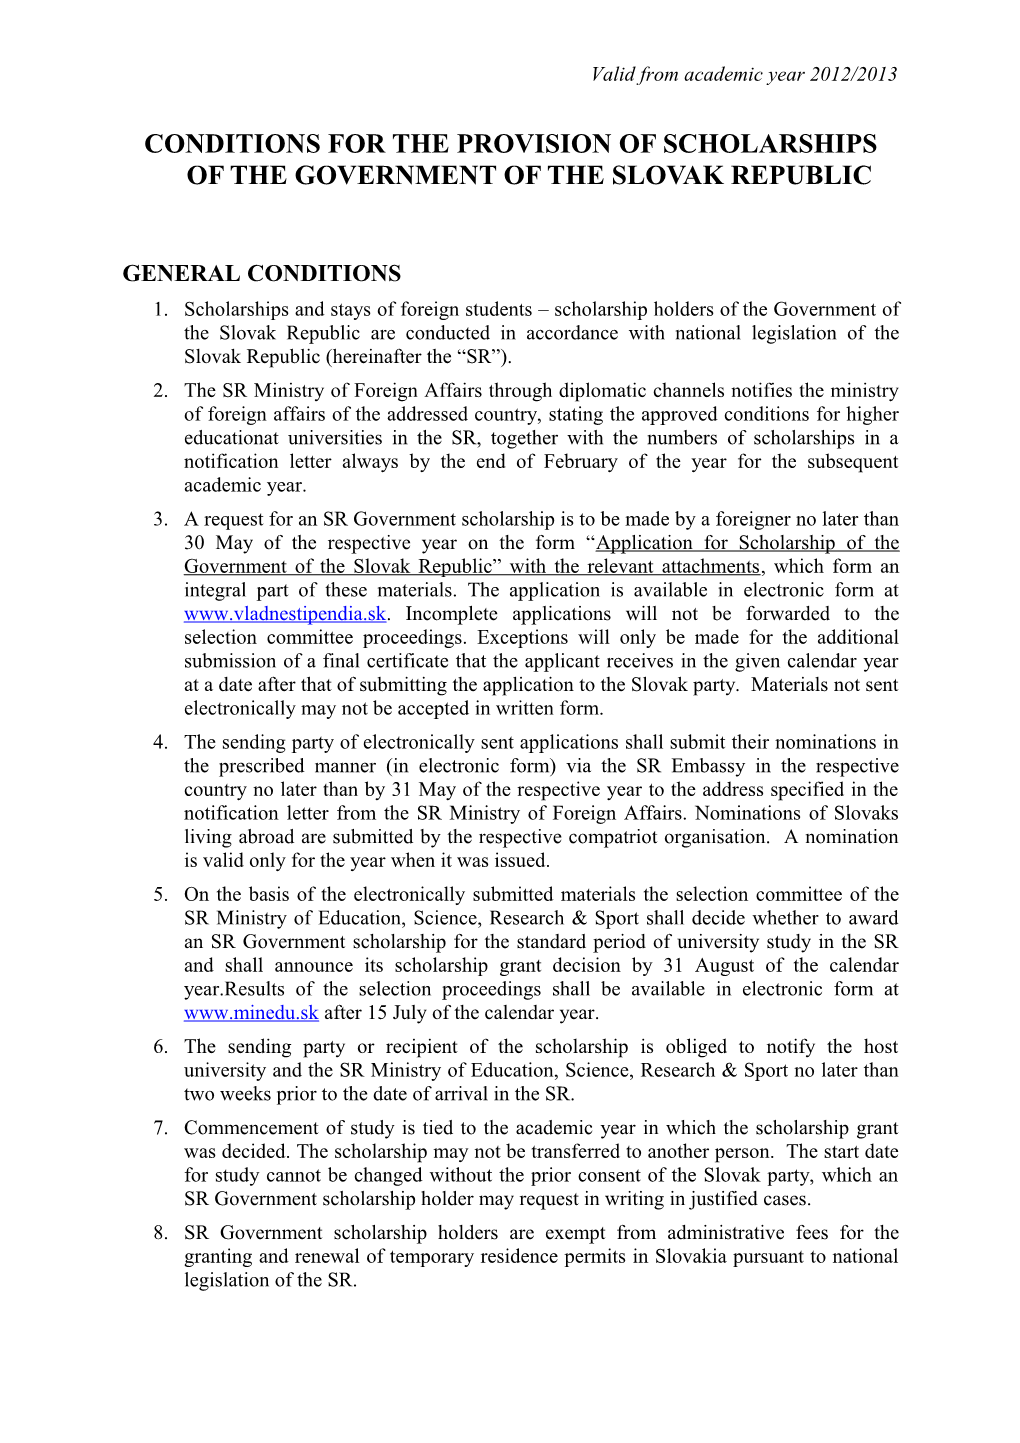 Conditions for the Provision of Scholarshipsof the Government of the Slovak Republic